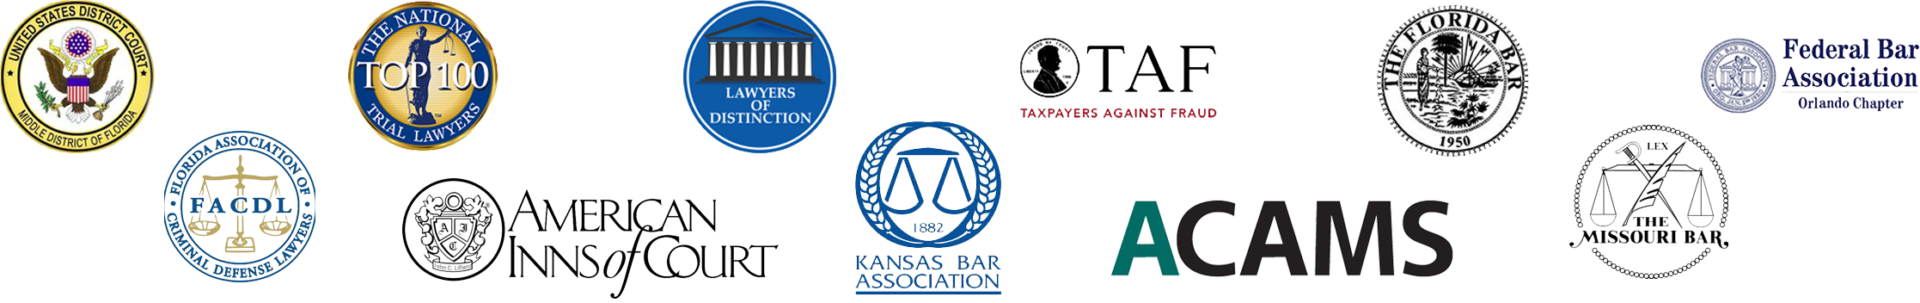 A series of logos for law firms and associations.